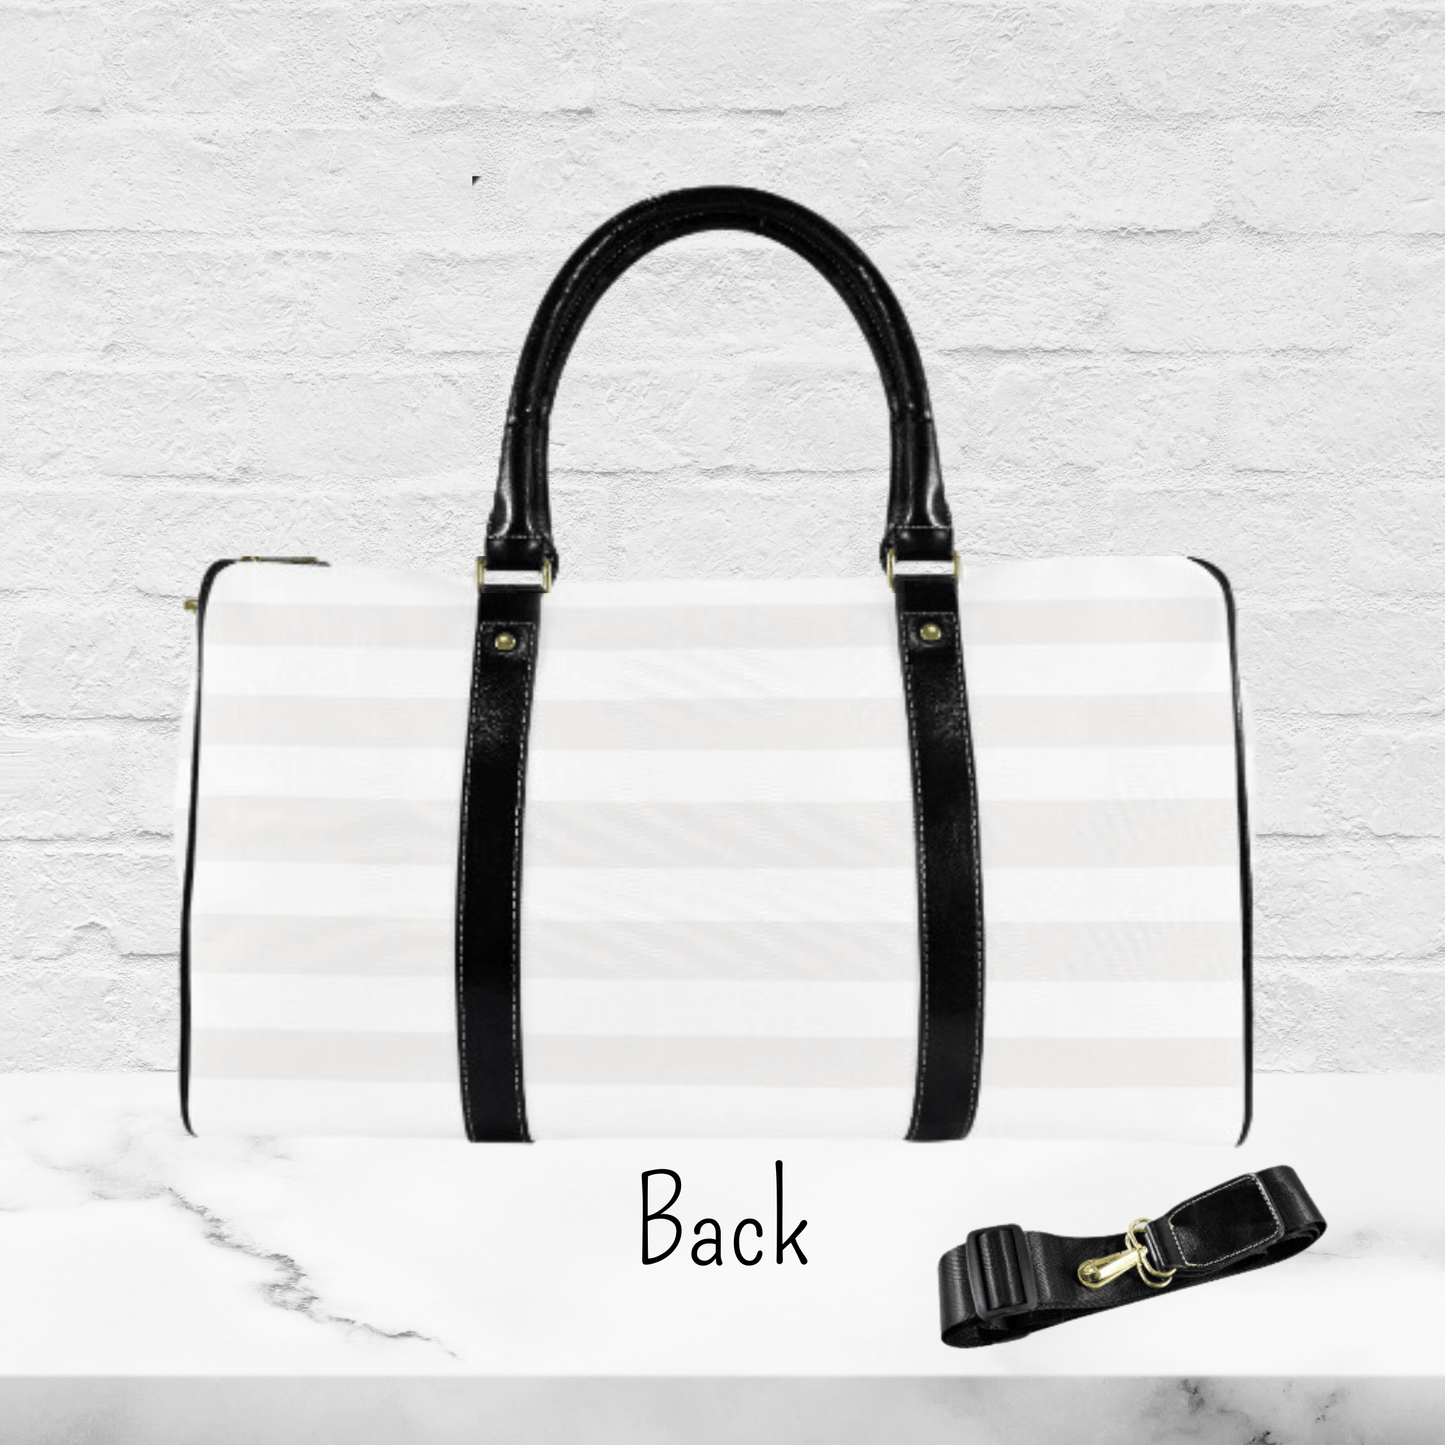 The back of our flight bag shows stipes of white and off white with black accents.